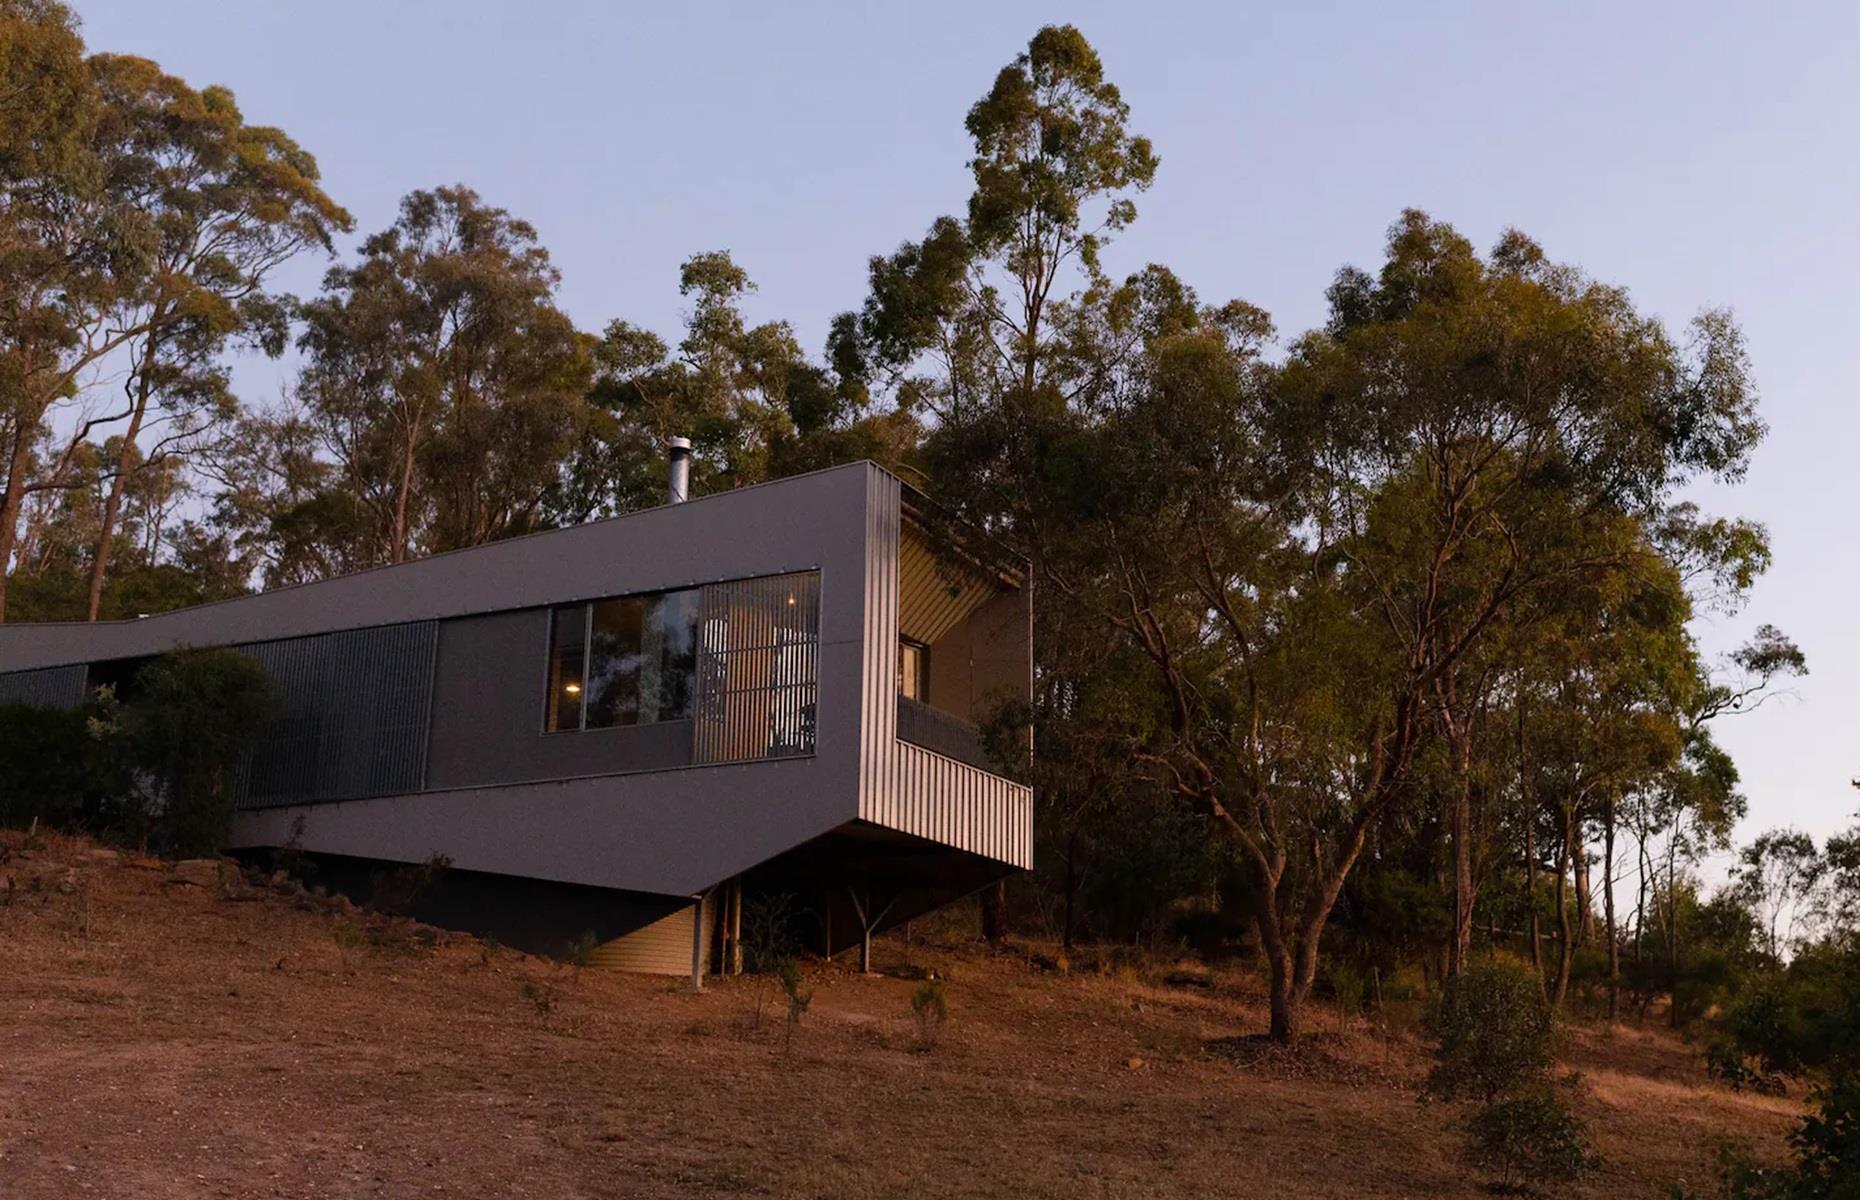 <p>Designed by Insite, the unique property is both eco-friendly and innovative. Imbued with Japanese influences, it features a bold, cantilevered design that allows it to "sit off the land yet be immersed within it", the <a href="https://insitedesign.com.au/base-camp">architects explain</a>. Crafted with bushfire and ESD (Ecologically Sustainable Development) principles in mind, it boasts solar hot water, a rainwater tank and super insulation.</p>